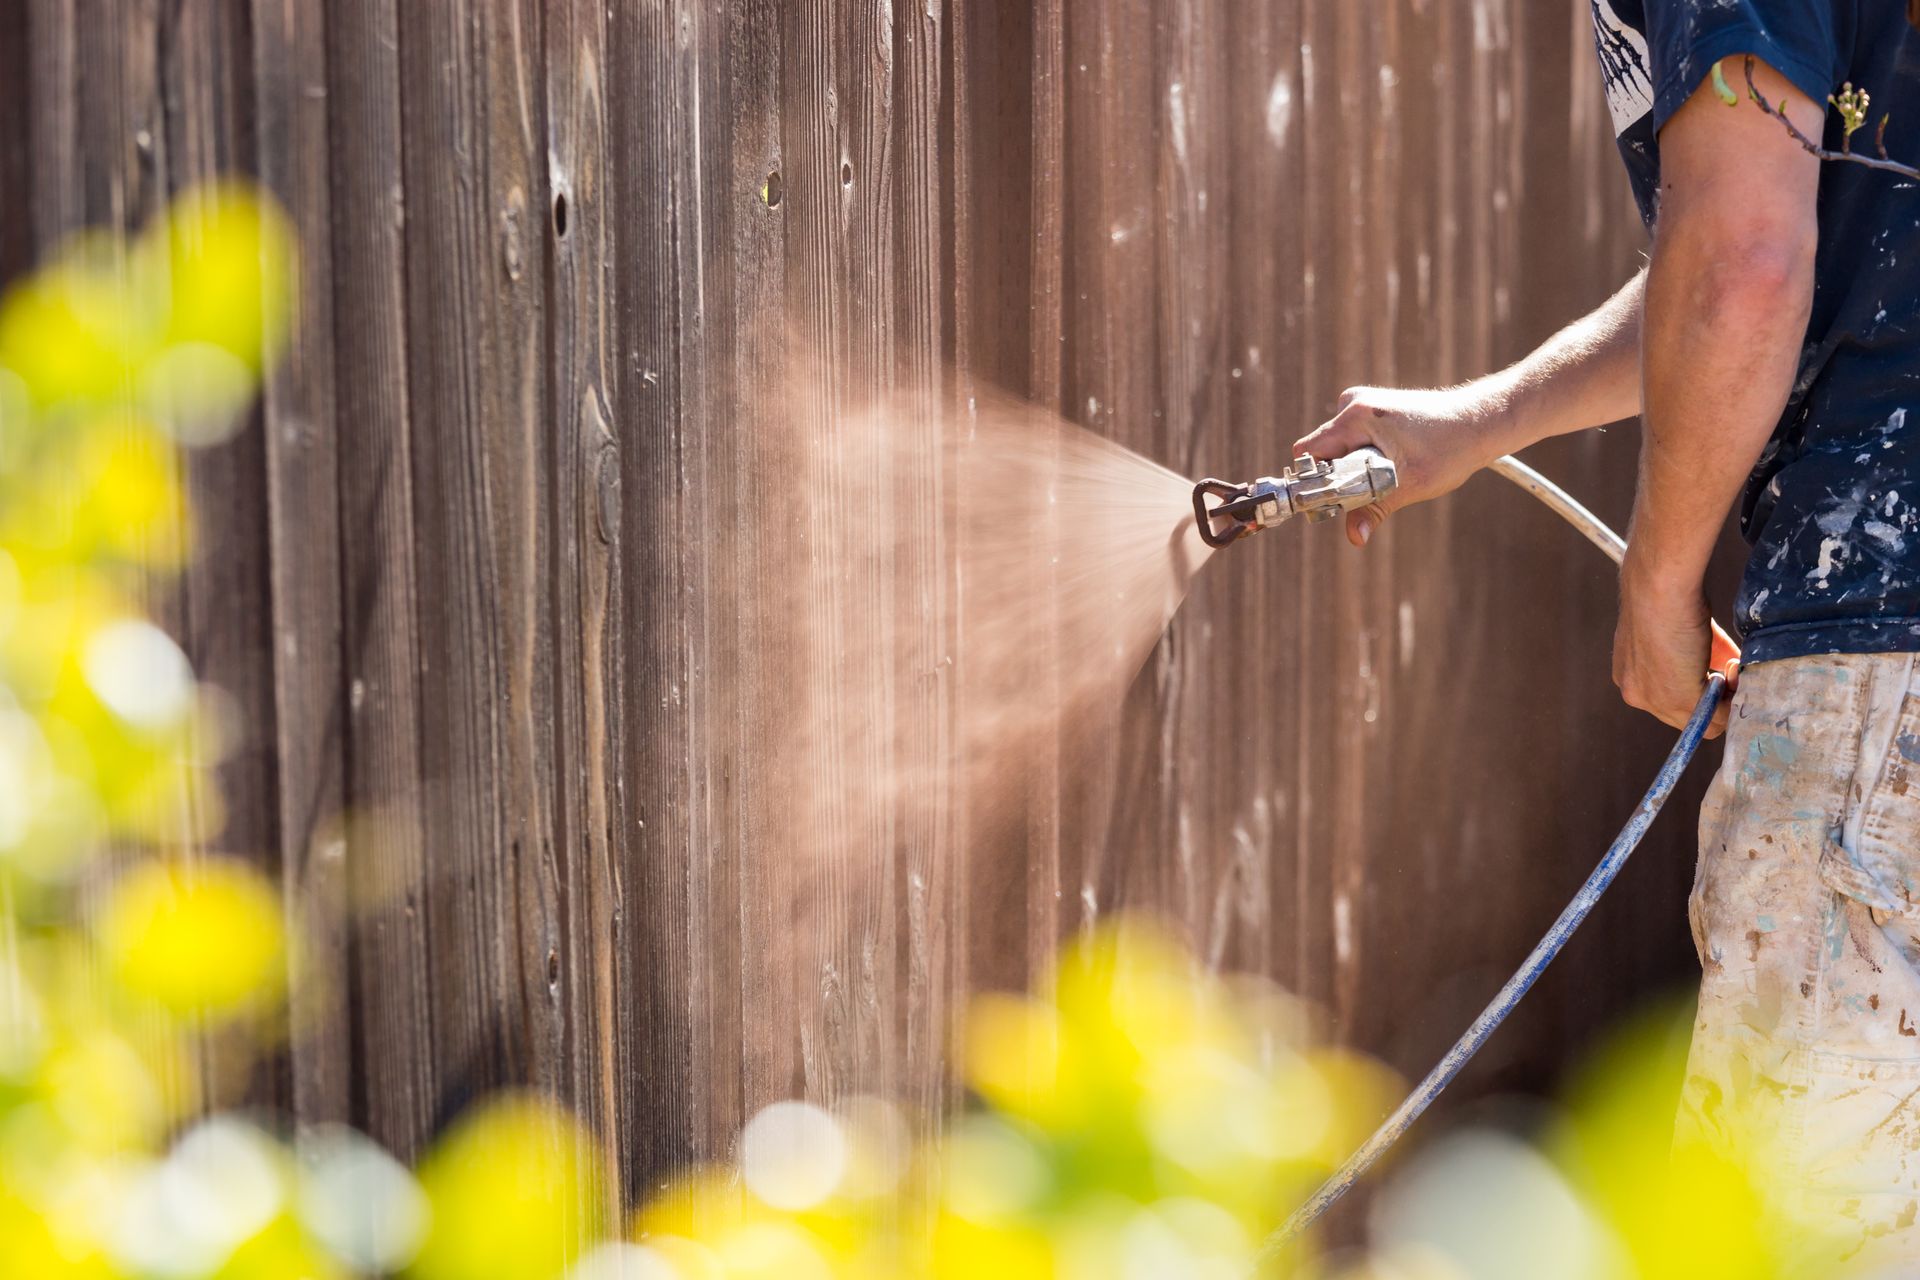 A person using an air spray gun to paint a fence, creating a fine mist of paint particles in the air.